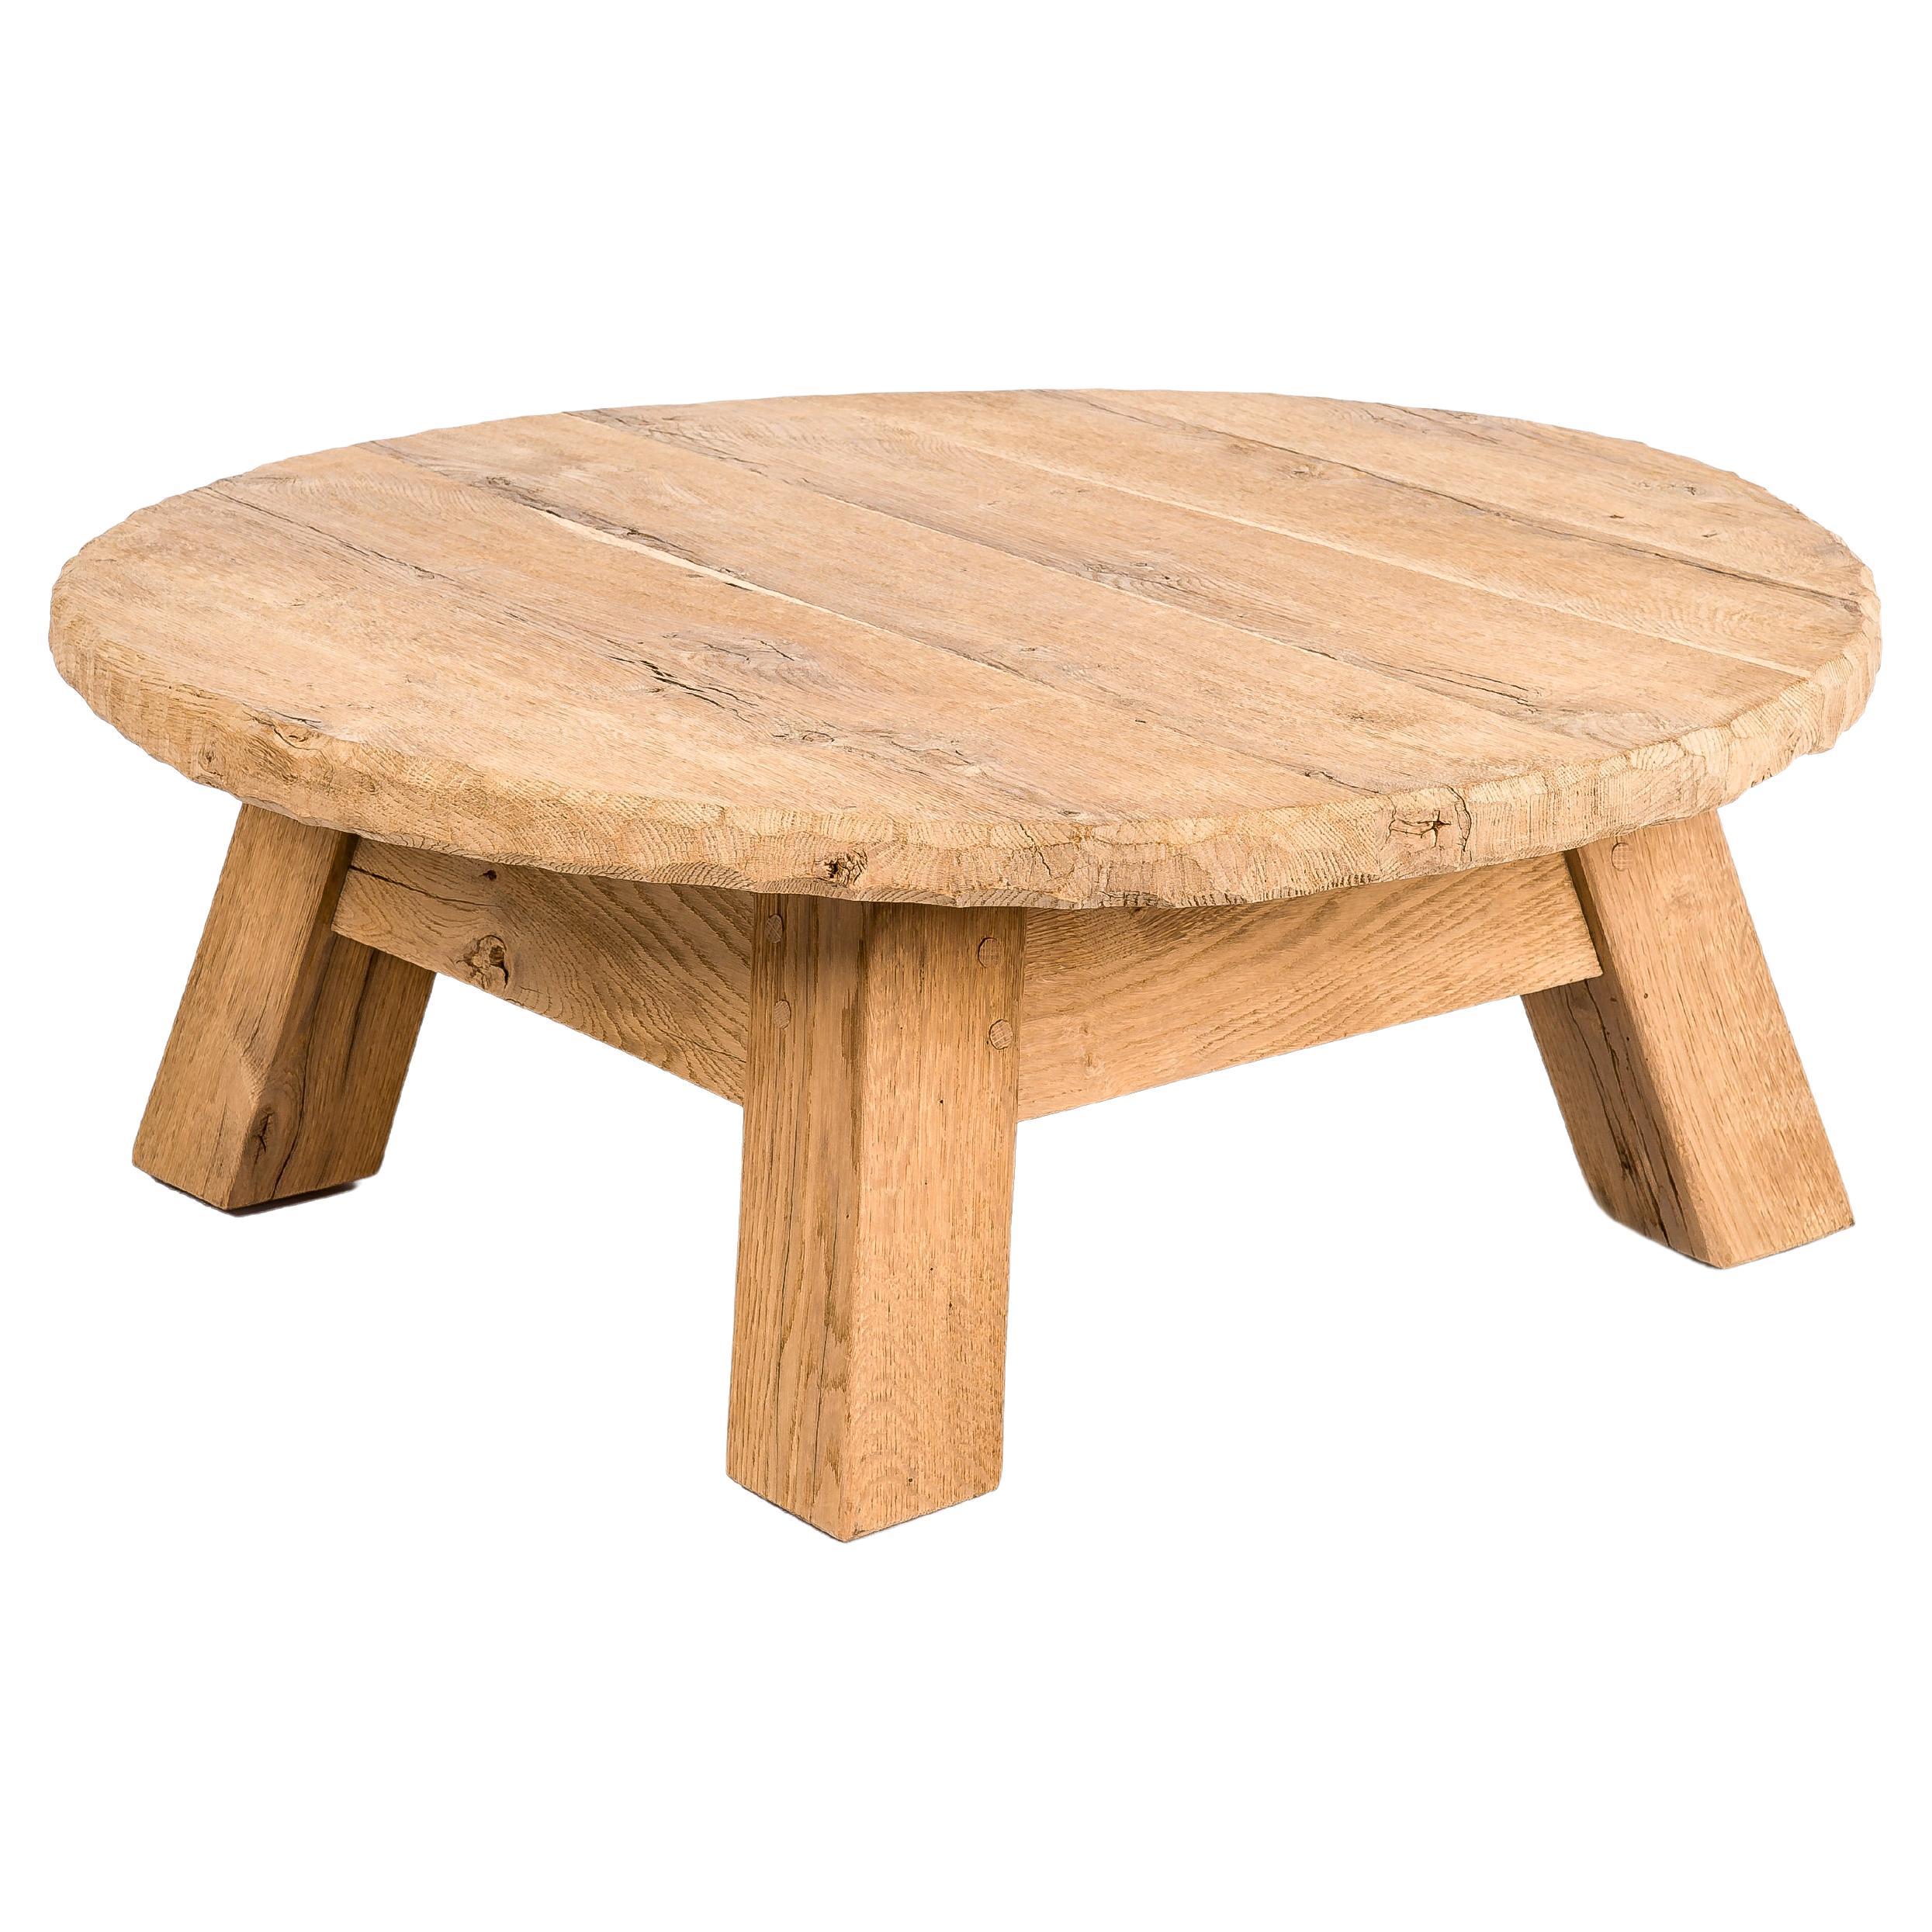 Rustic Natural Cleaned Solid Oak Round Coffee Table or Low Table For Sale